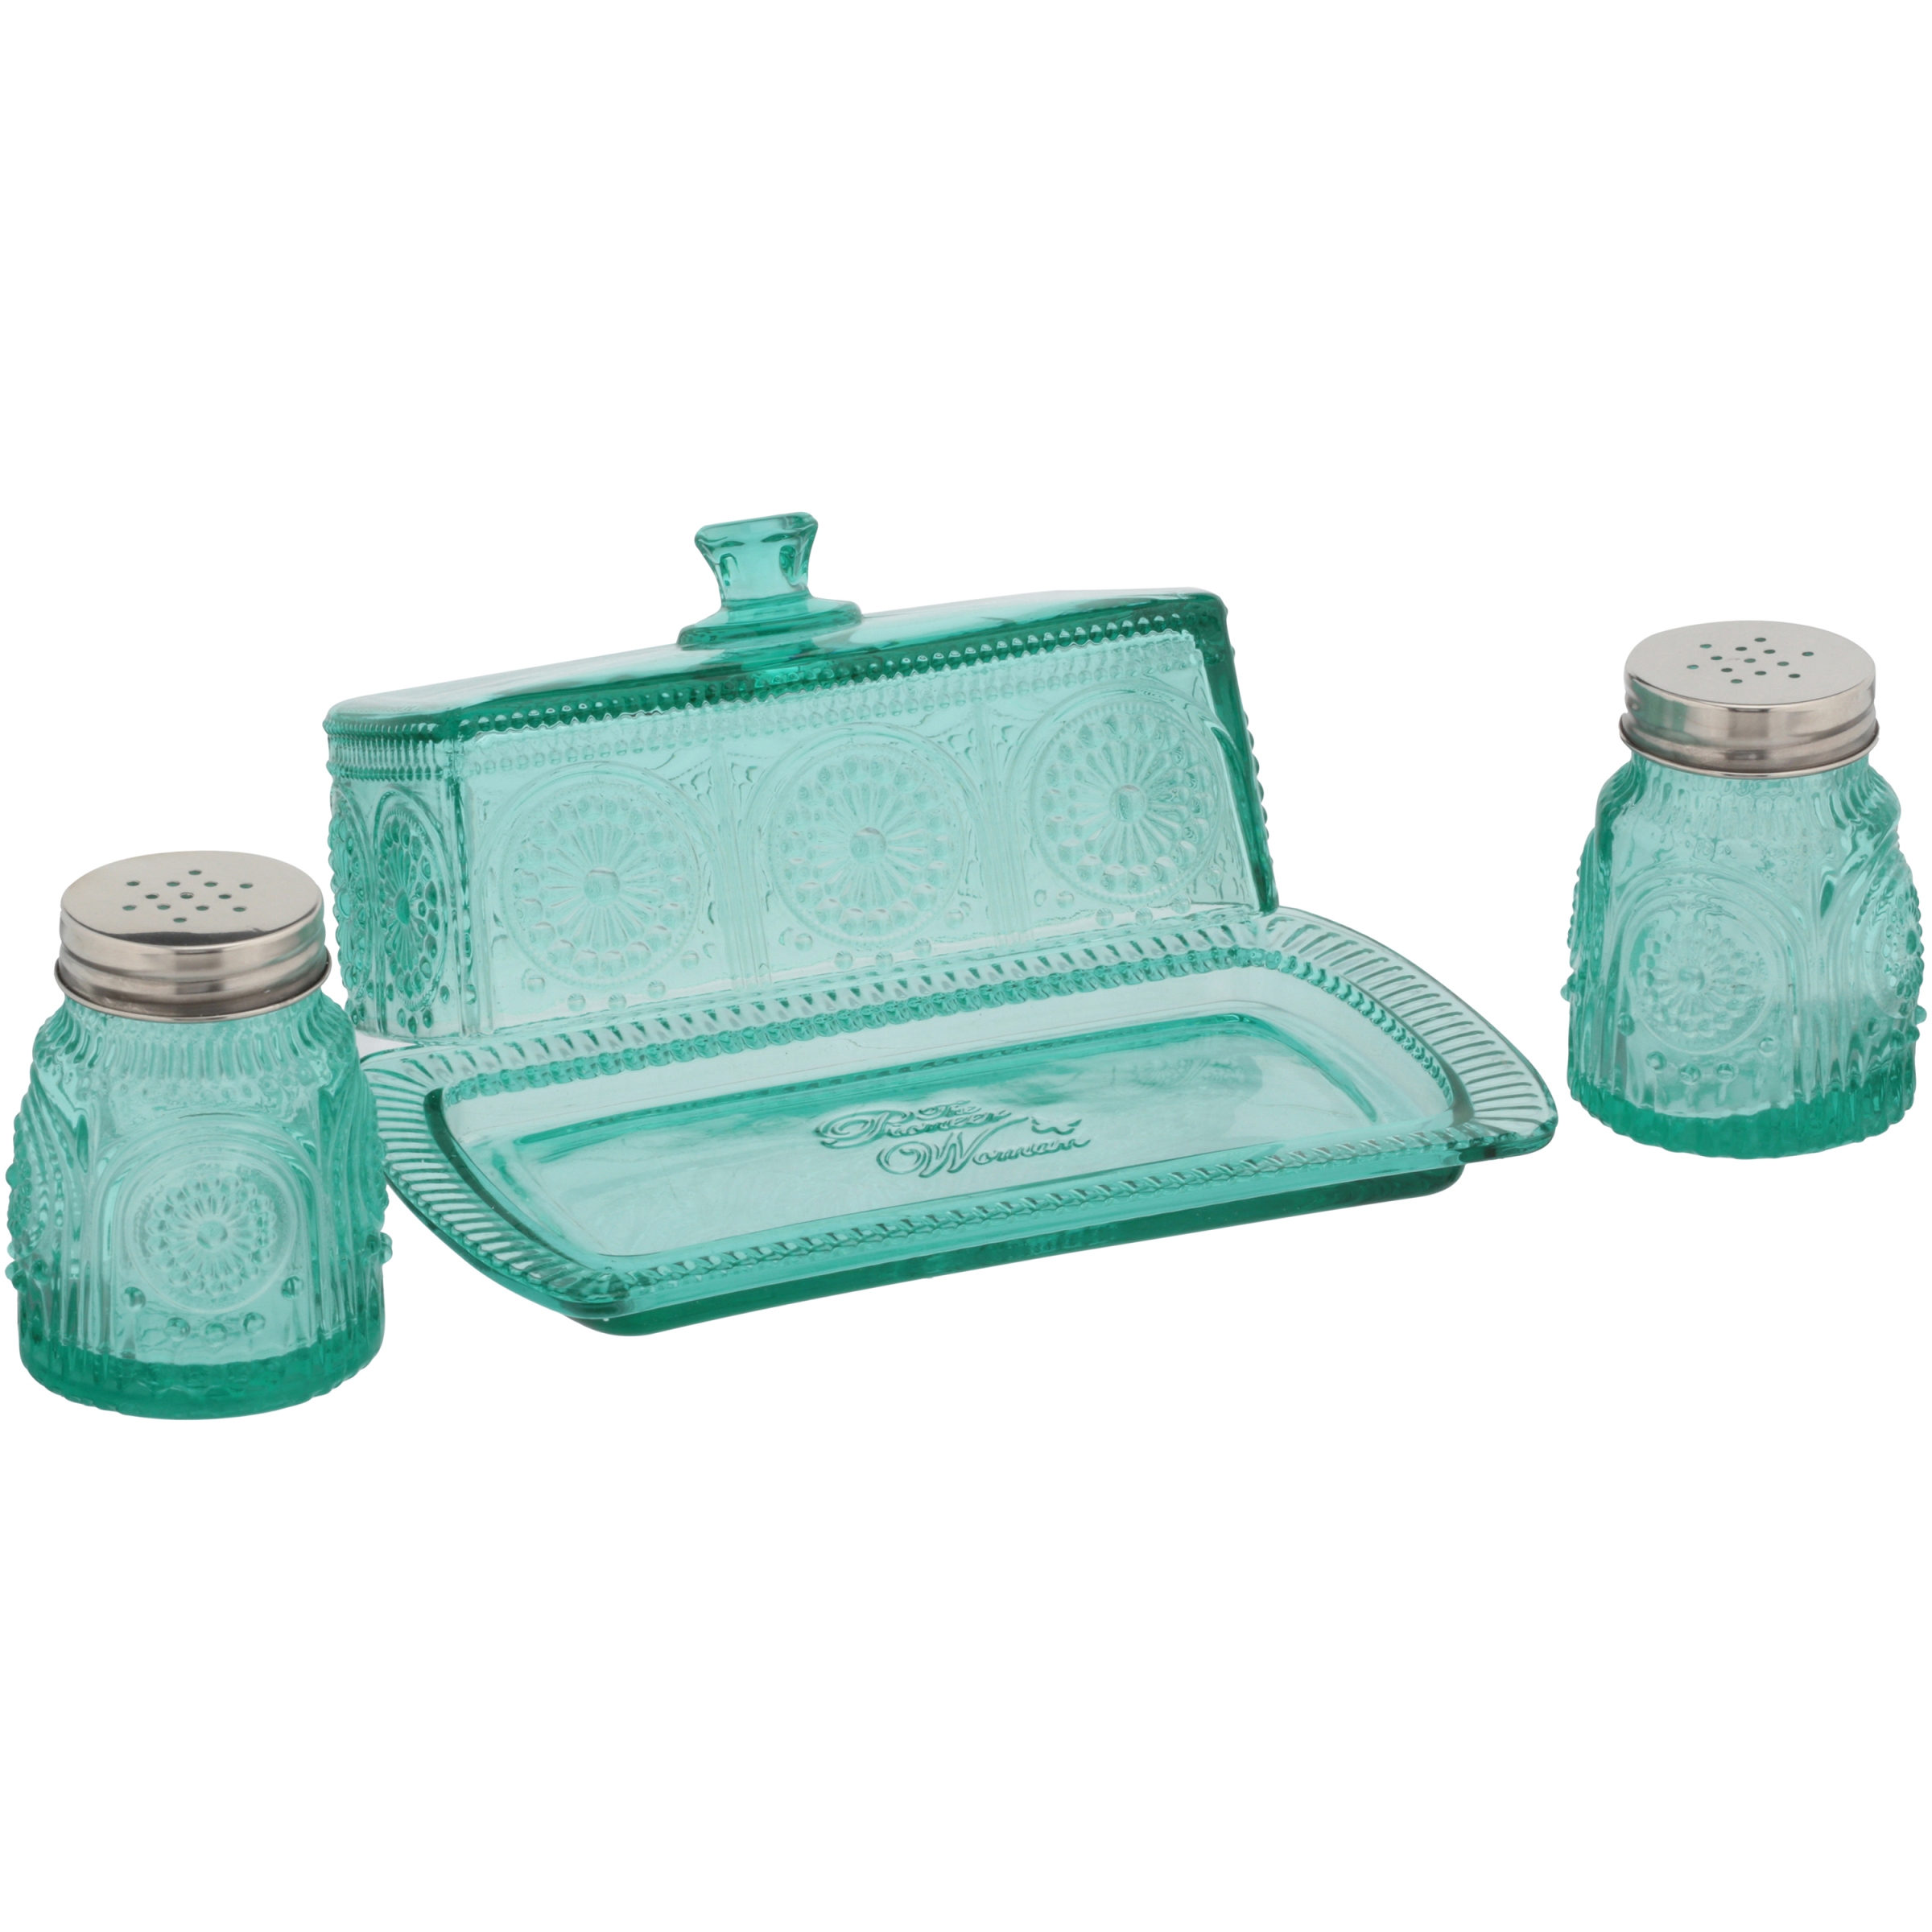 The Pioneer Woman Adeline Glass Butter Dish with Salt And Pepper Shaker Set - image 1 of 9